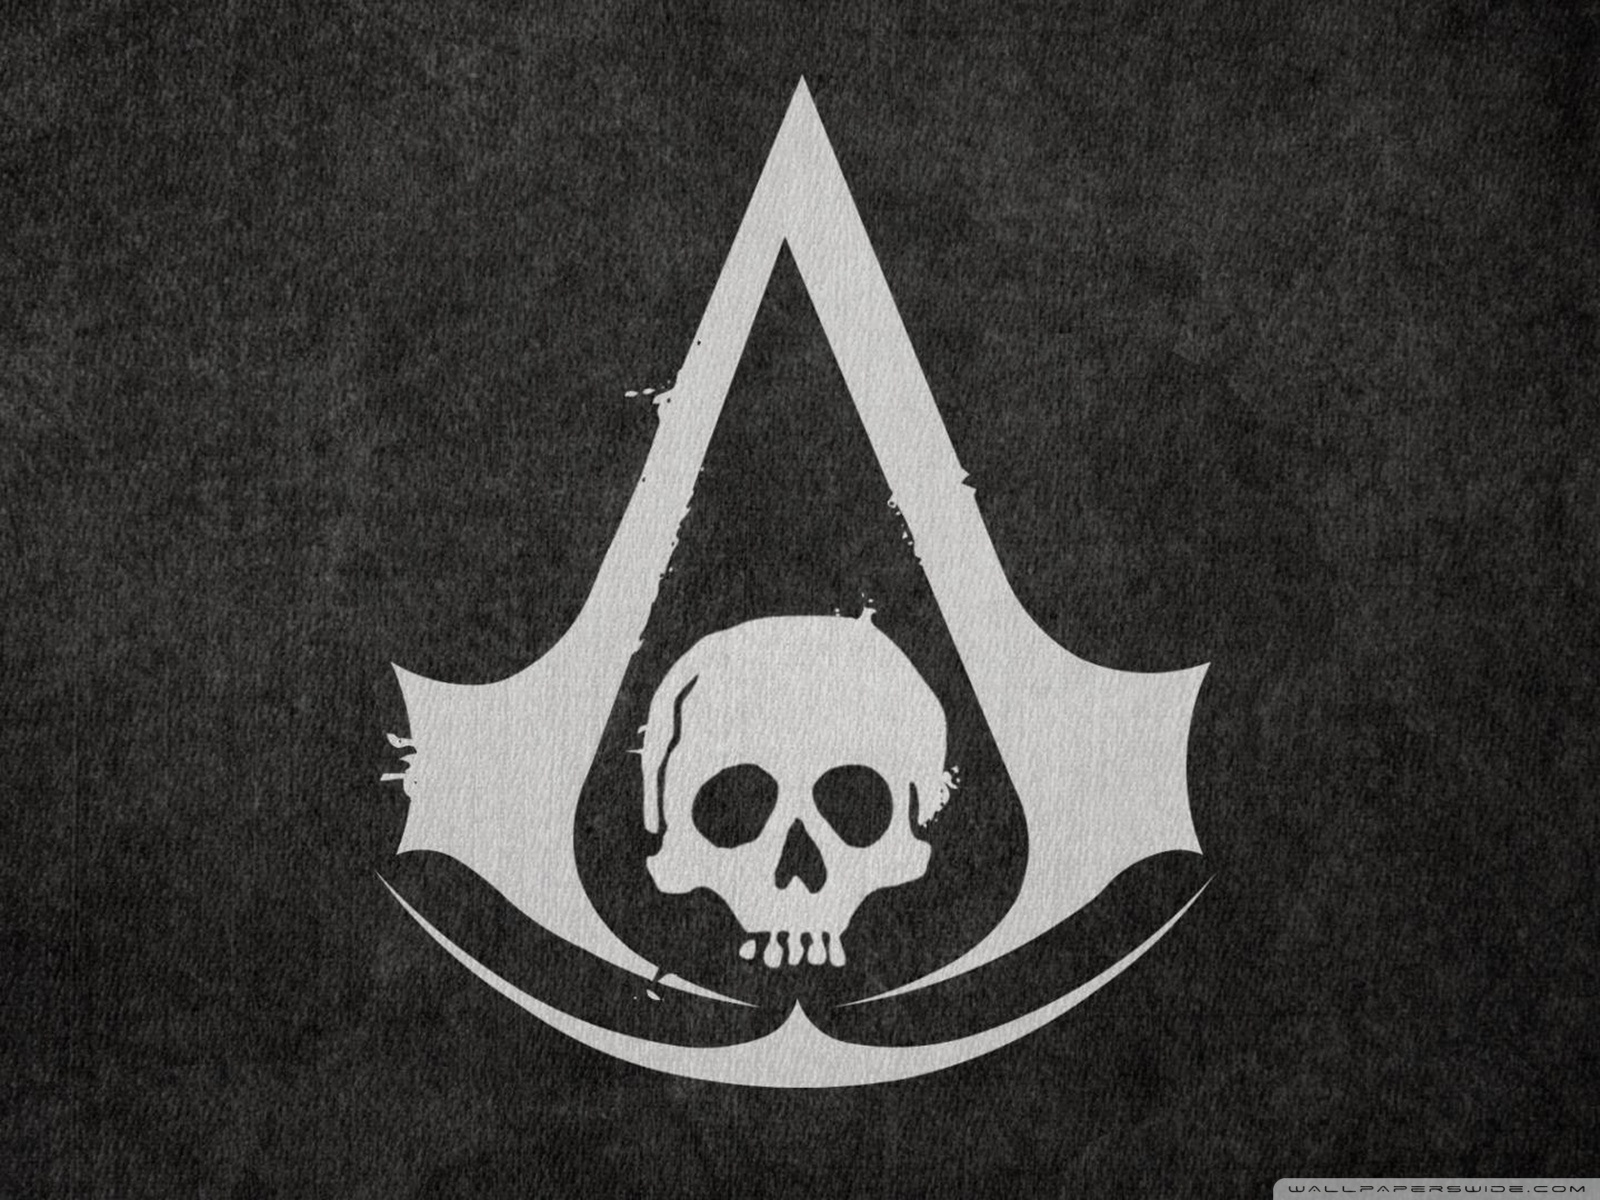 Free Assassins Creed 4 pirate flag phone wallpaper by karliesmom